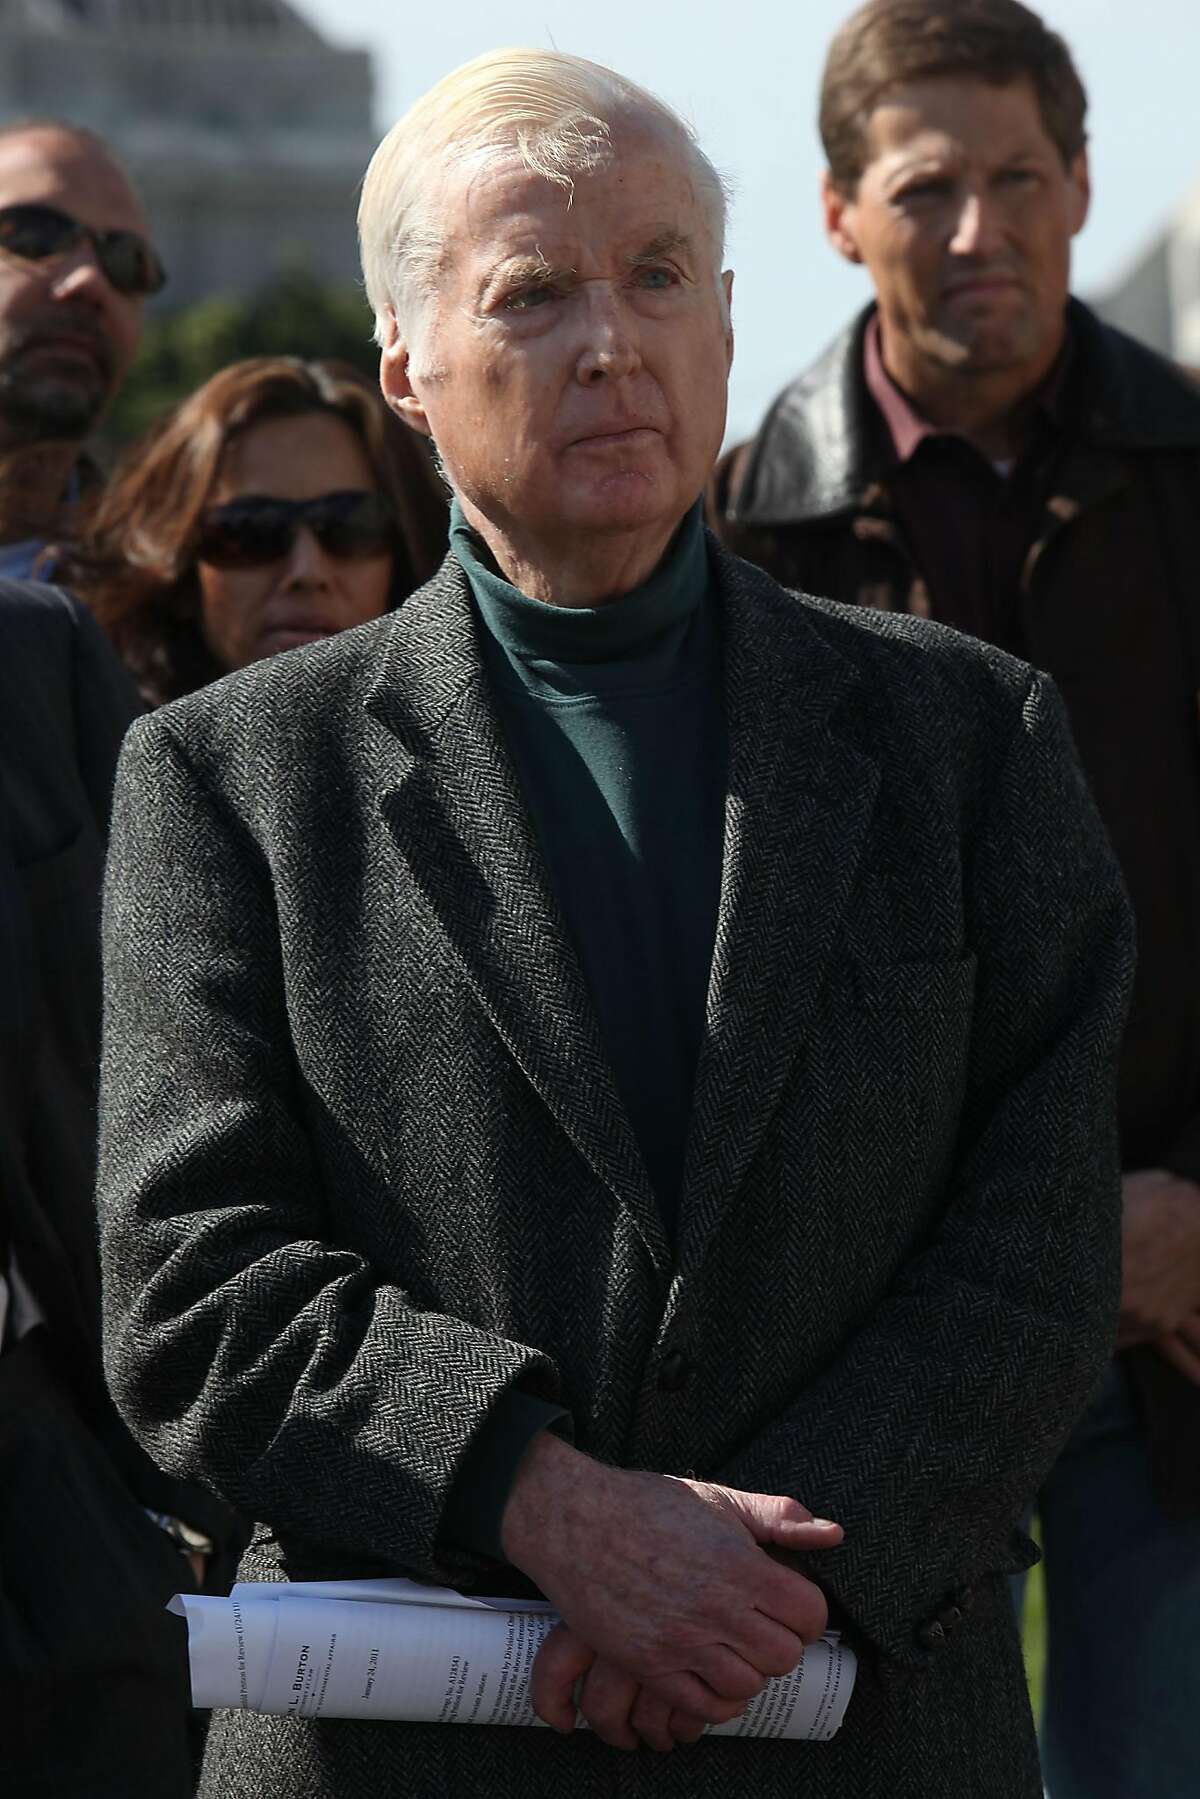 Retired state justice William Newsom at a press conference in the Civic Center Plaza in San Francisco Calif., to ask that the men convicted in the 1976 schoolbus kidnapping in Chowchilla be released on parole on Monday, February 14, 2011.